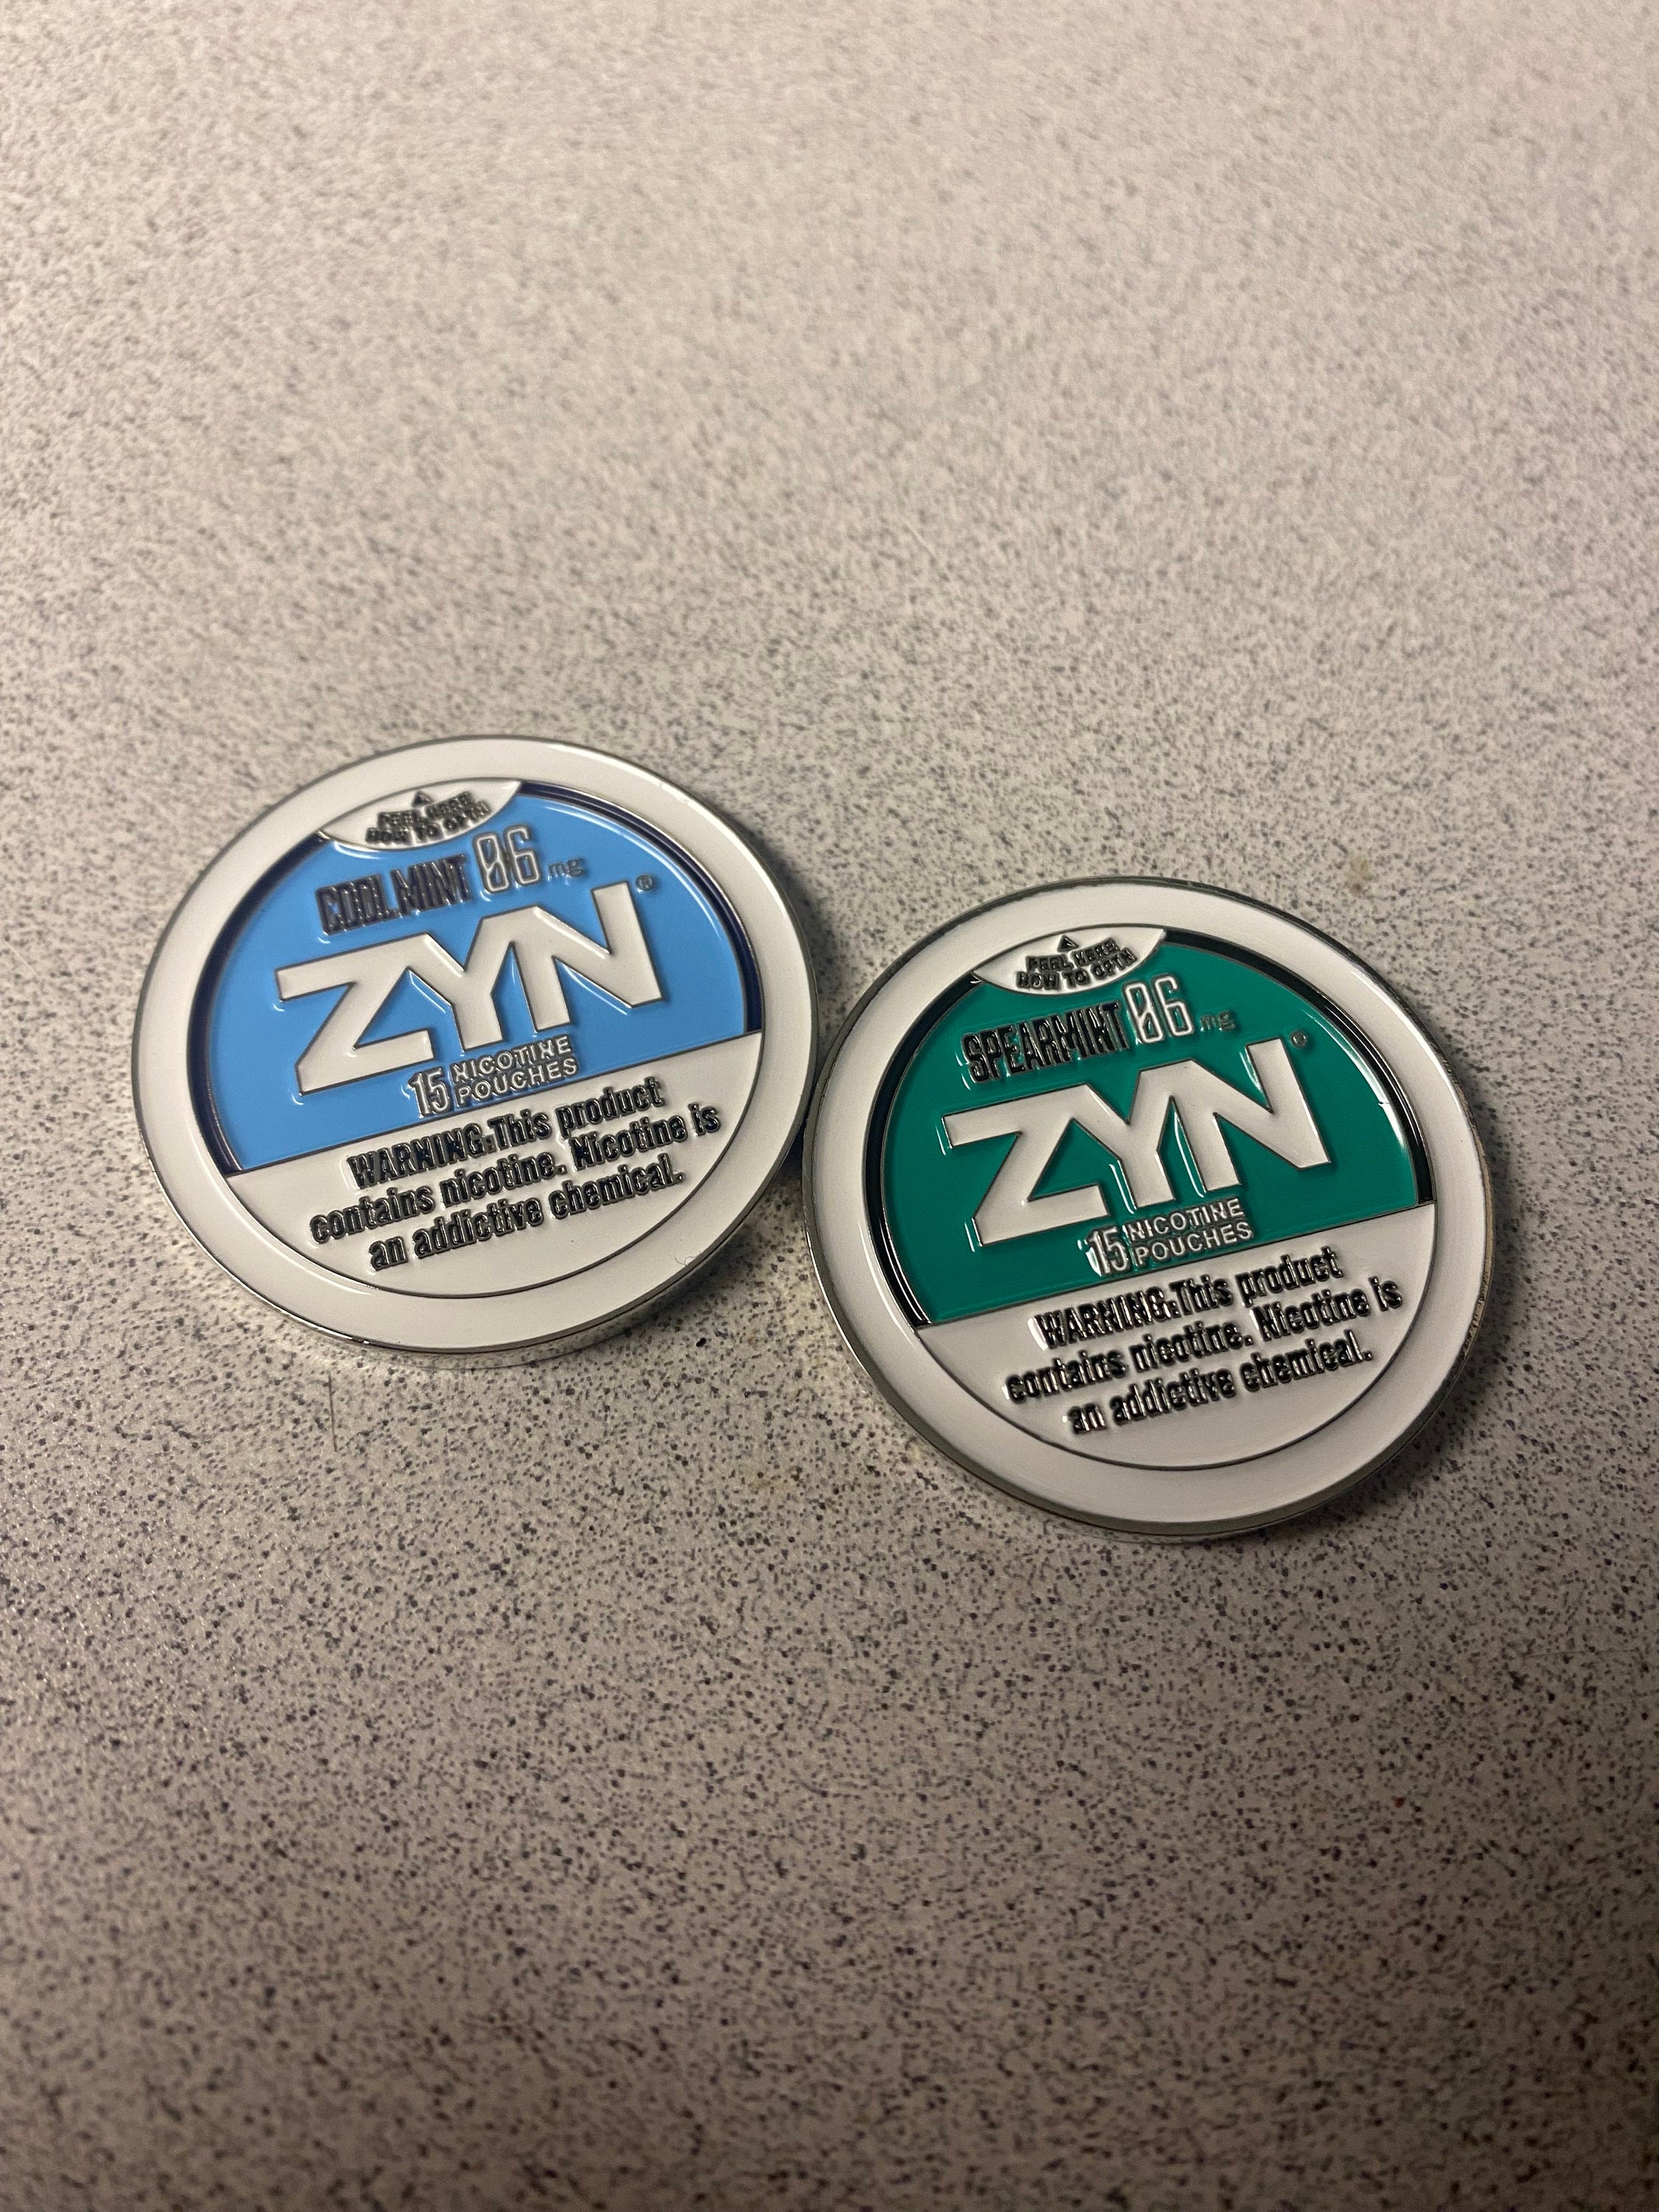 Aluminum Snus Can Snuffbox metal with Lid Customized Logo 3 Layers  Christmas Gifts zyn metal can